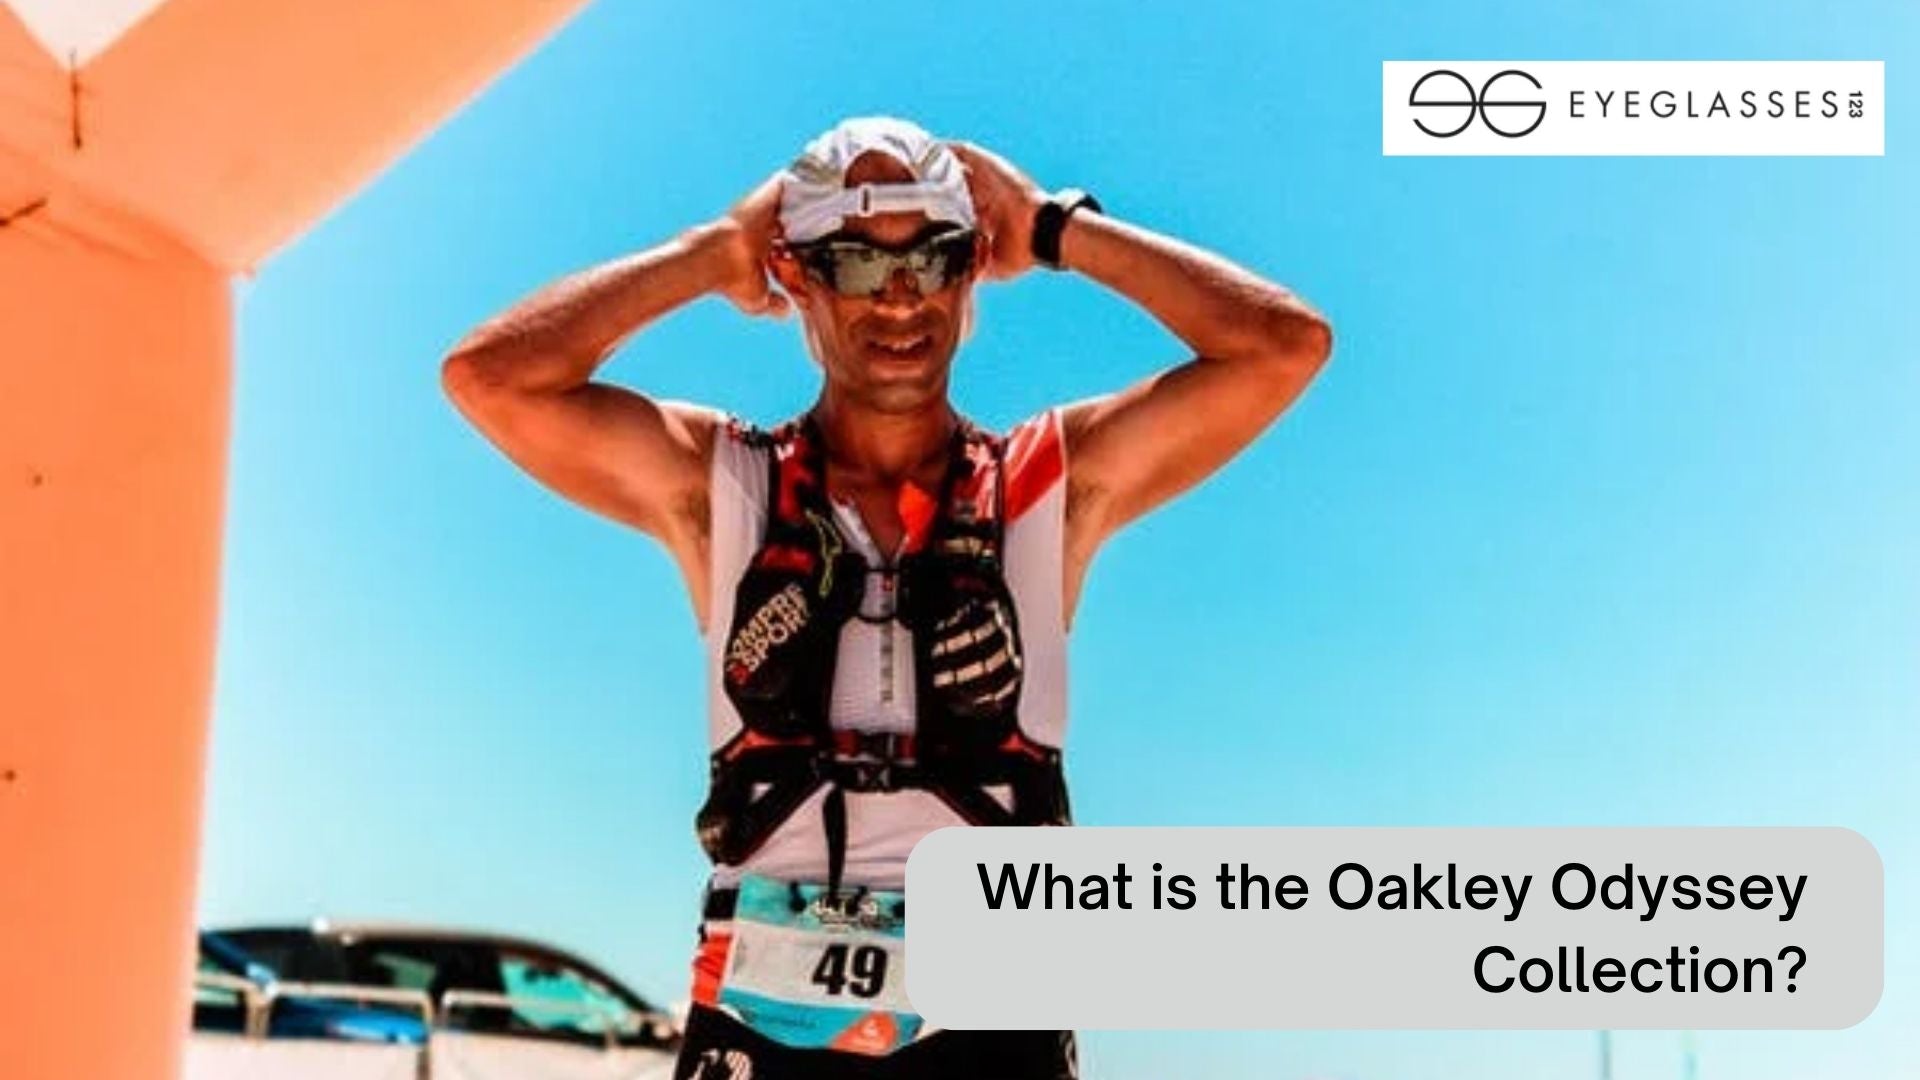 What is the Oakley Odyssey Collection?